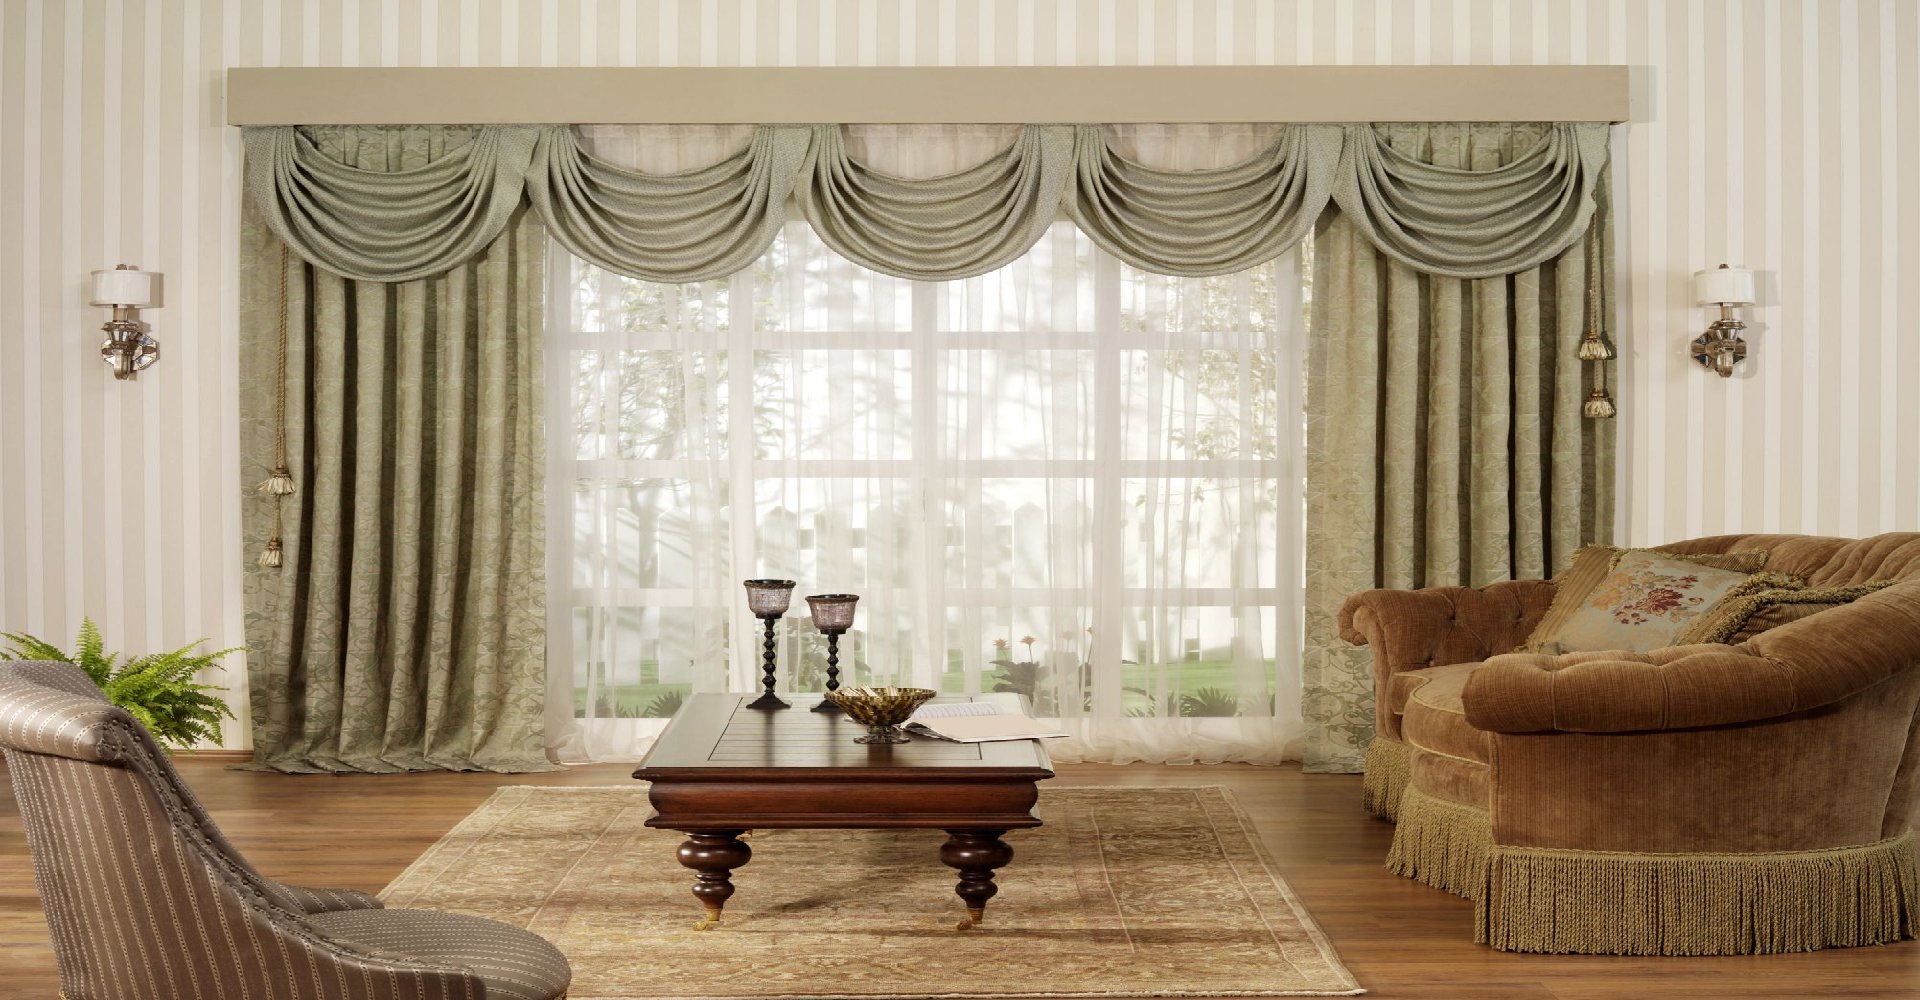 WHAT ARE THE VARIATIONS BETWEEN DRAPERIES & CURTAINS?